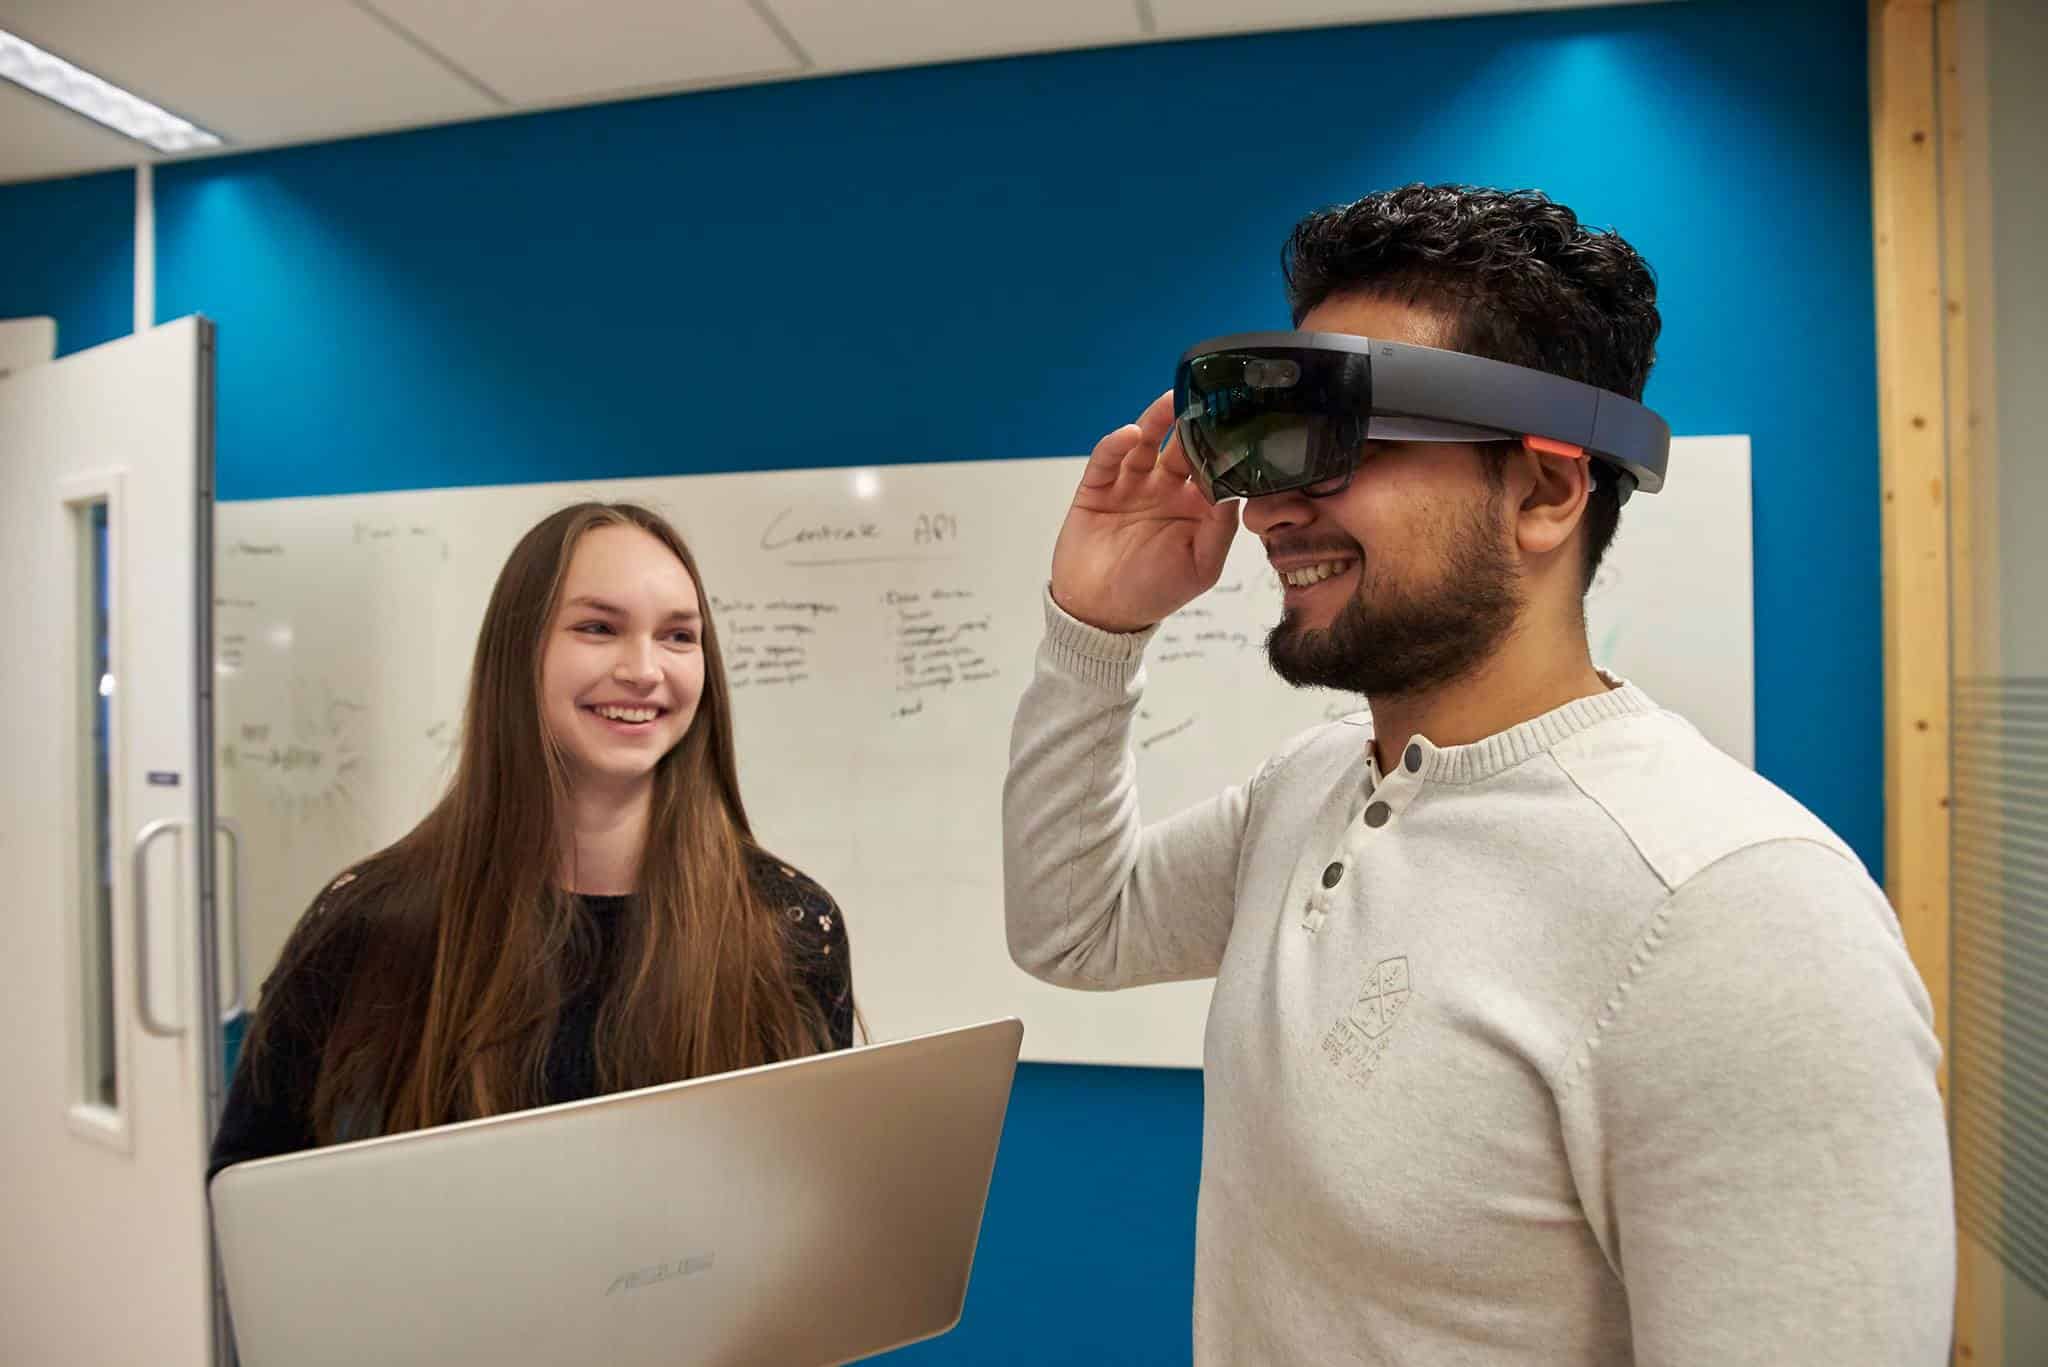 Rotterdam University of Applied Science shows: students are the future of immersive tech